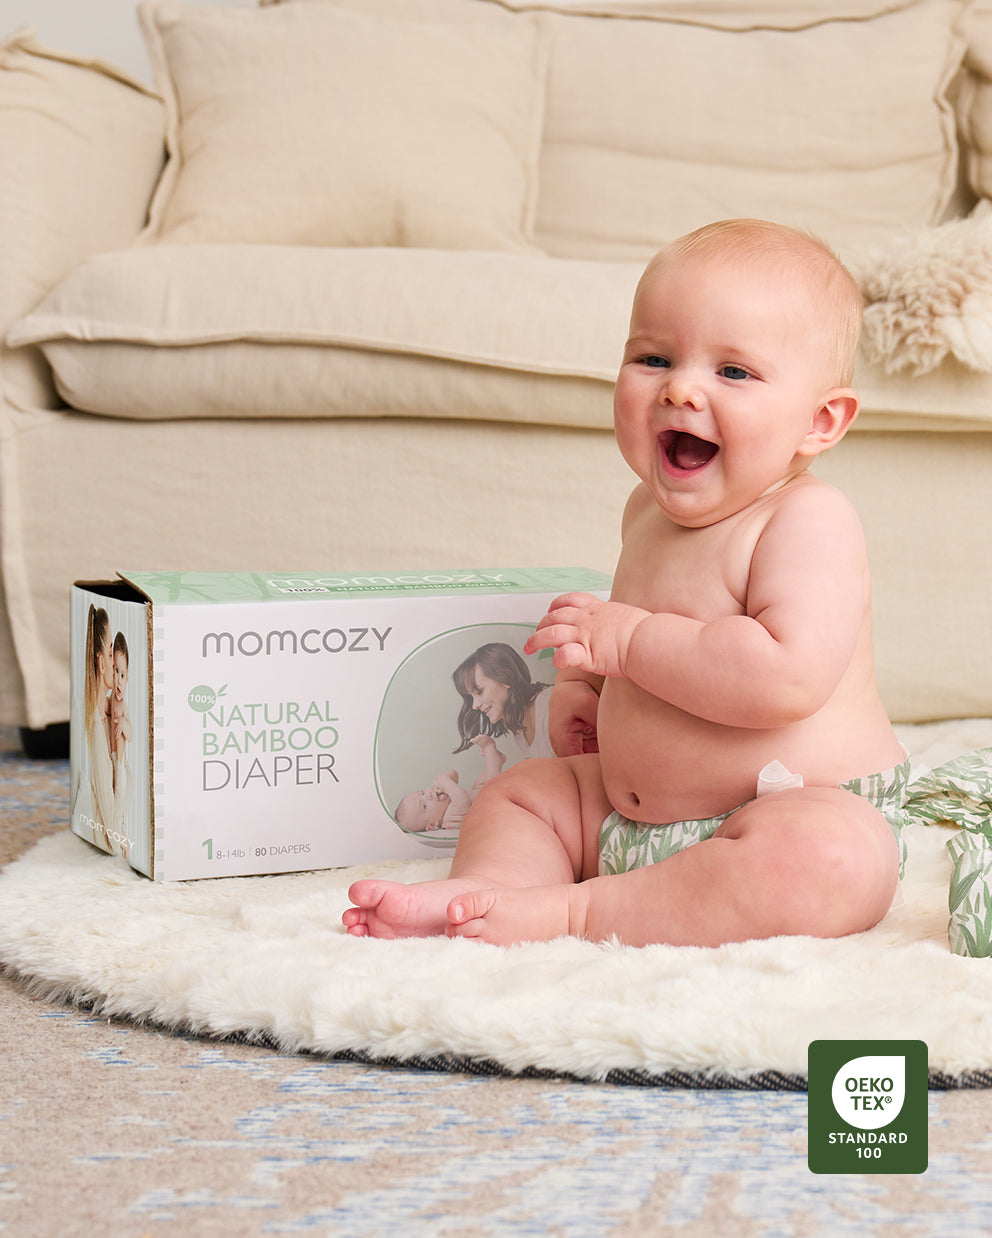 We love our @Momcozy Official Diaper Bag & Bamboo Diapers! 👶 #fyp #am